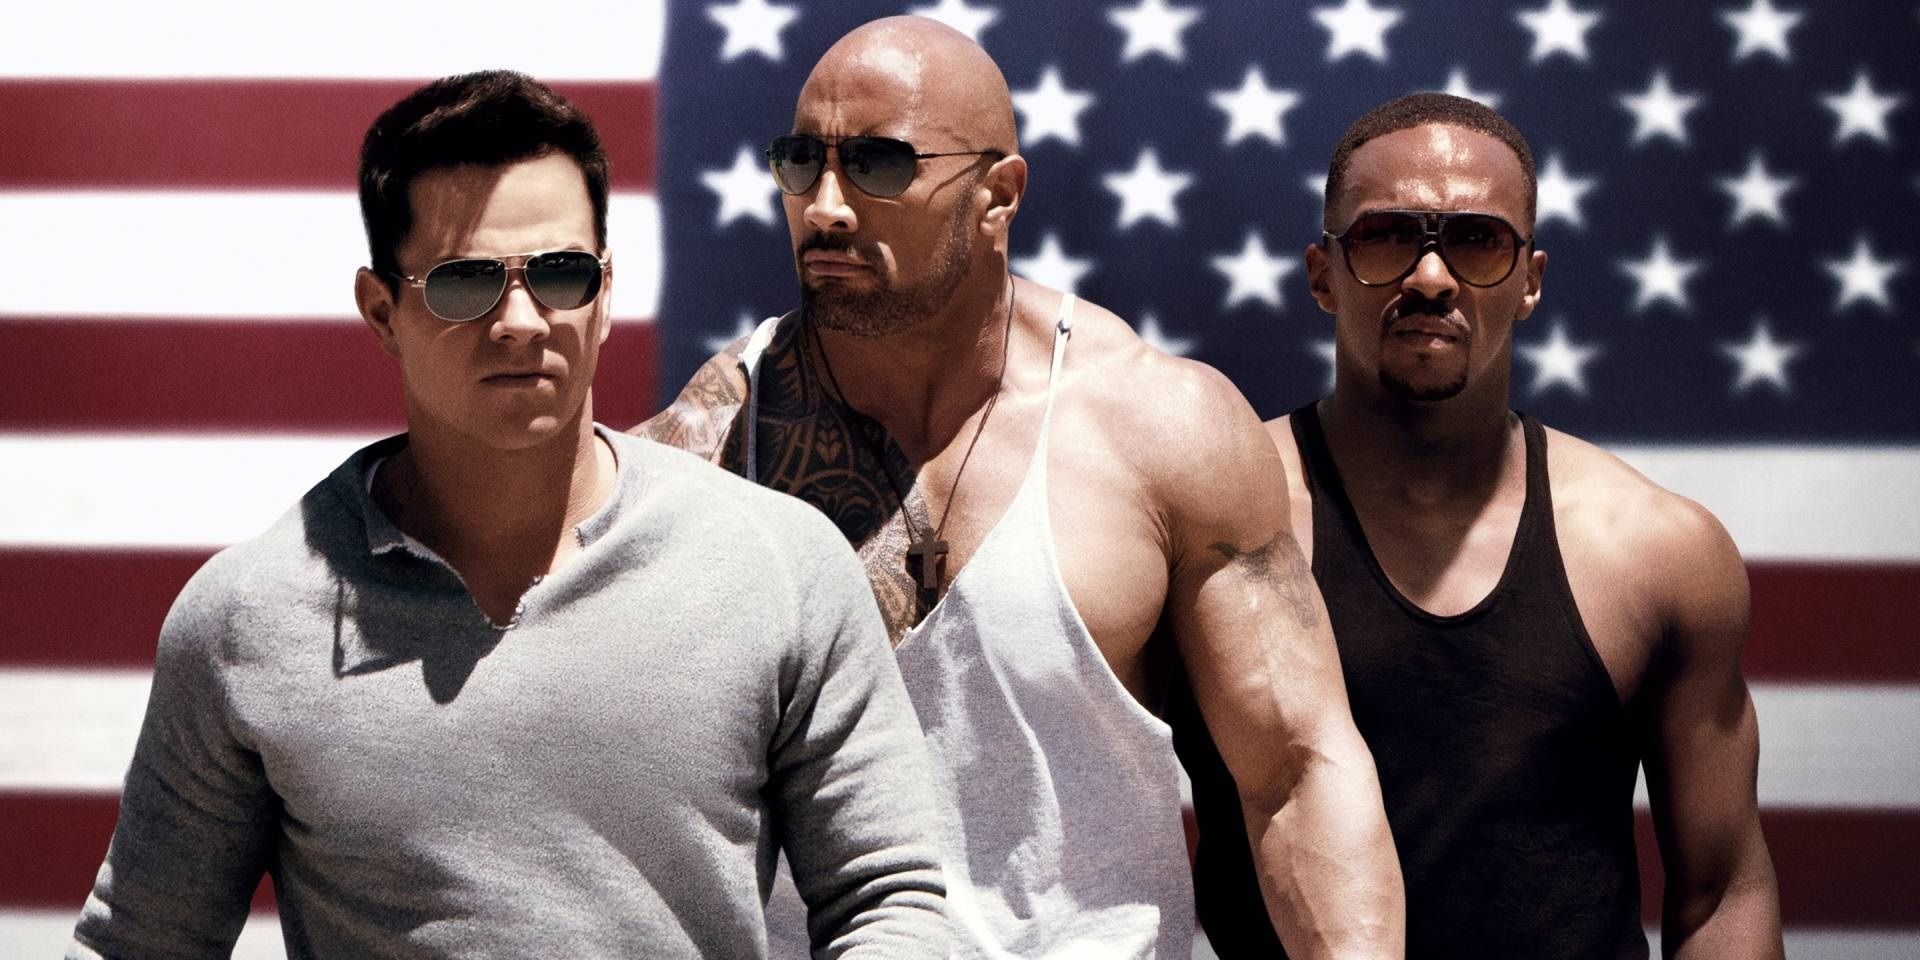 Mark Wahlberg, Dwayne Johnson, and Anthony Mackie in front of an American flag in Pain and Gain